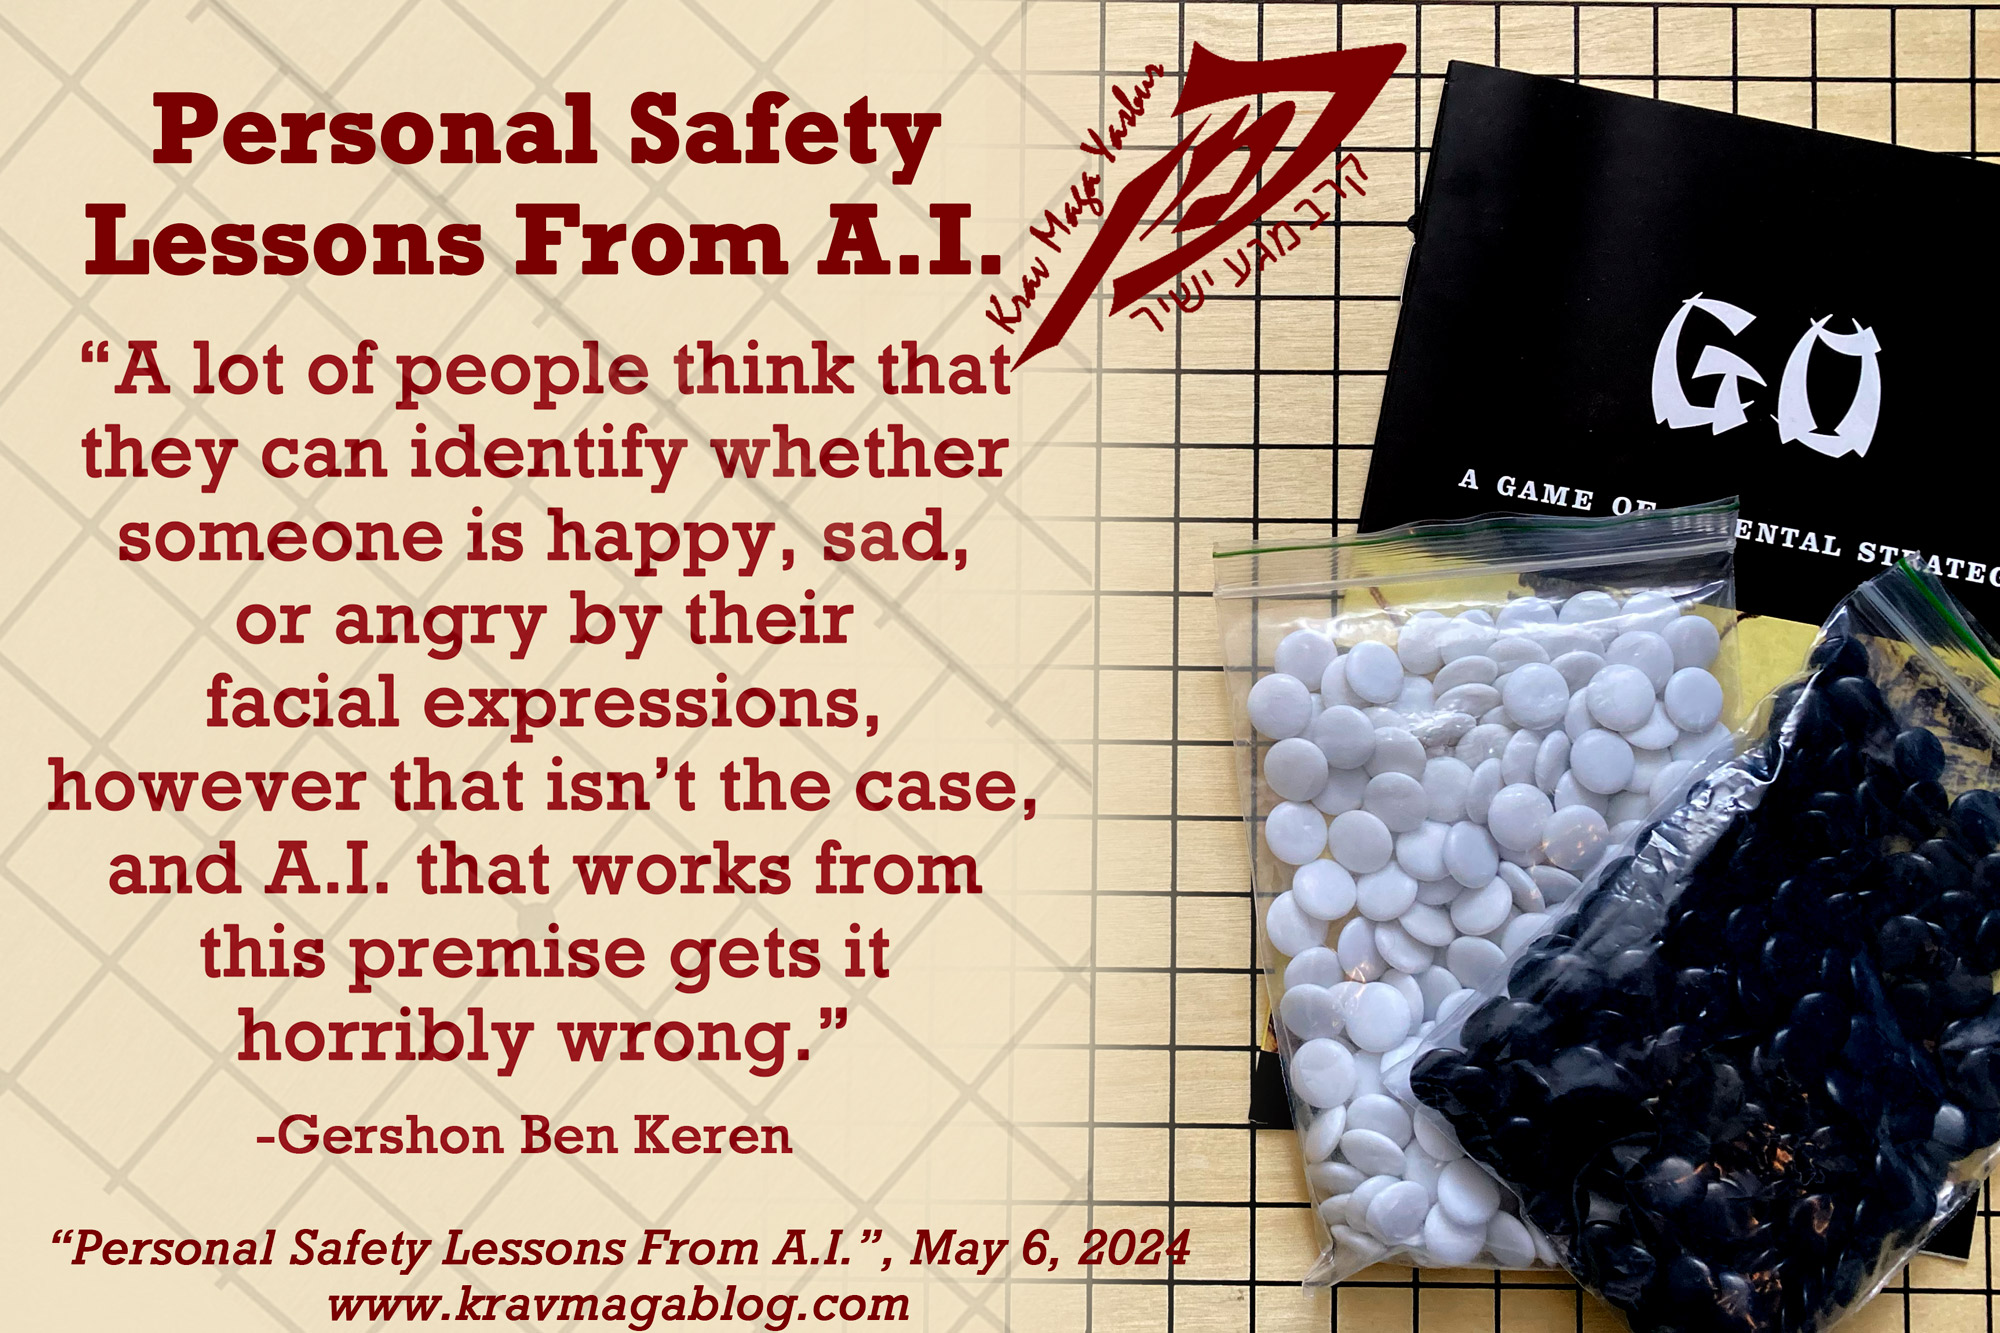 Personal Safety Lessons from A.I. (Artificial Intelligence)